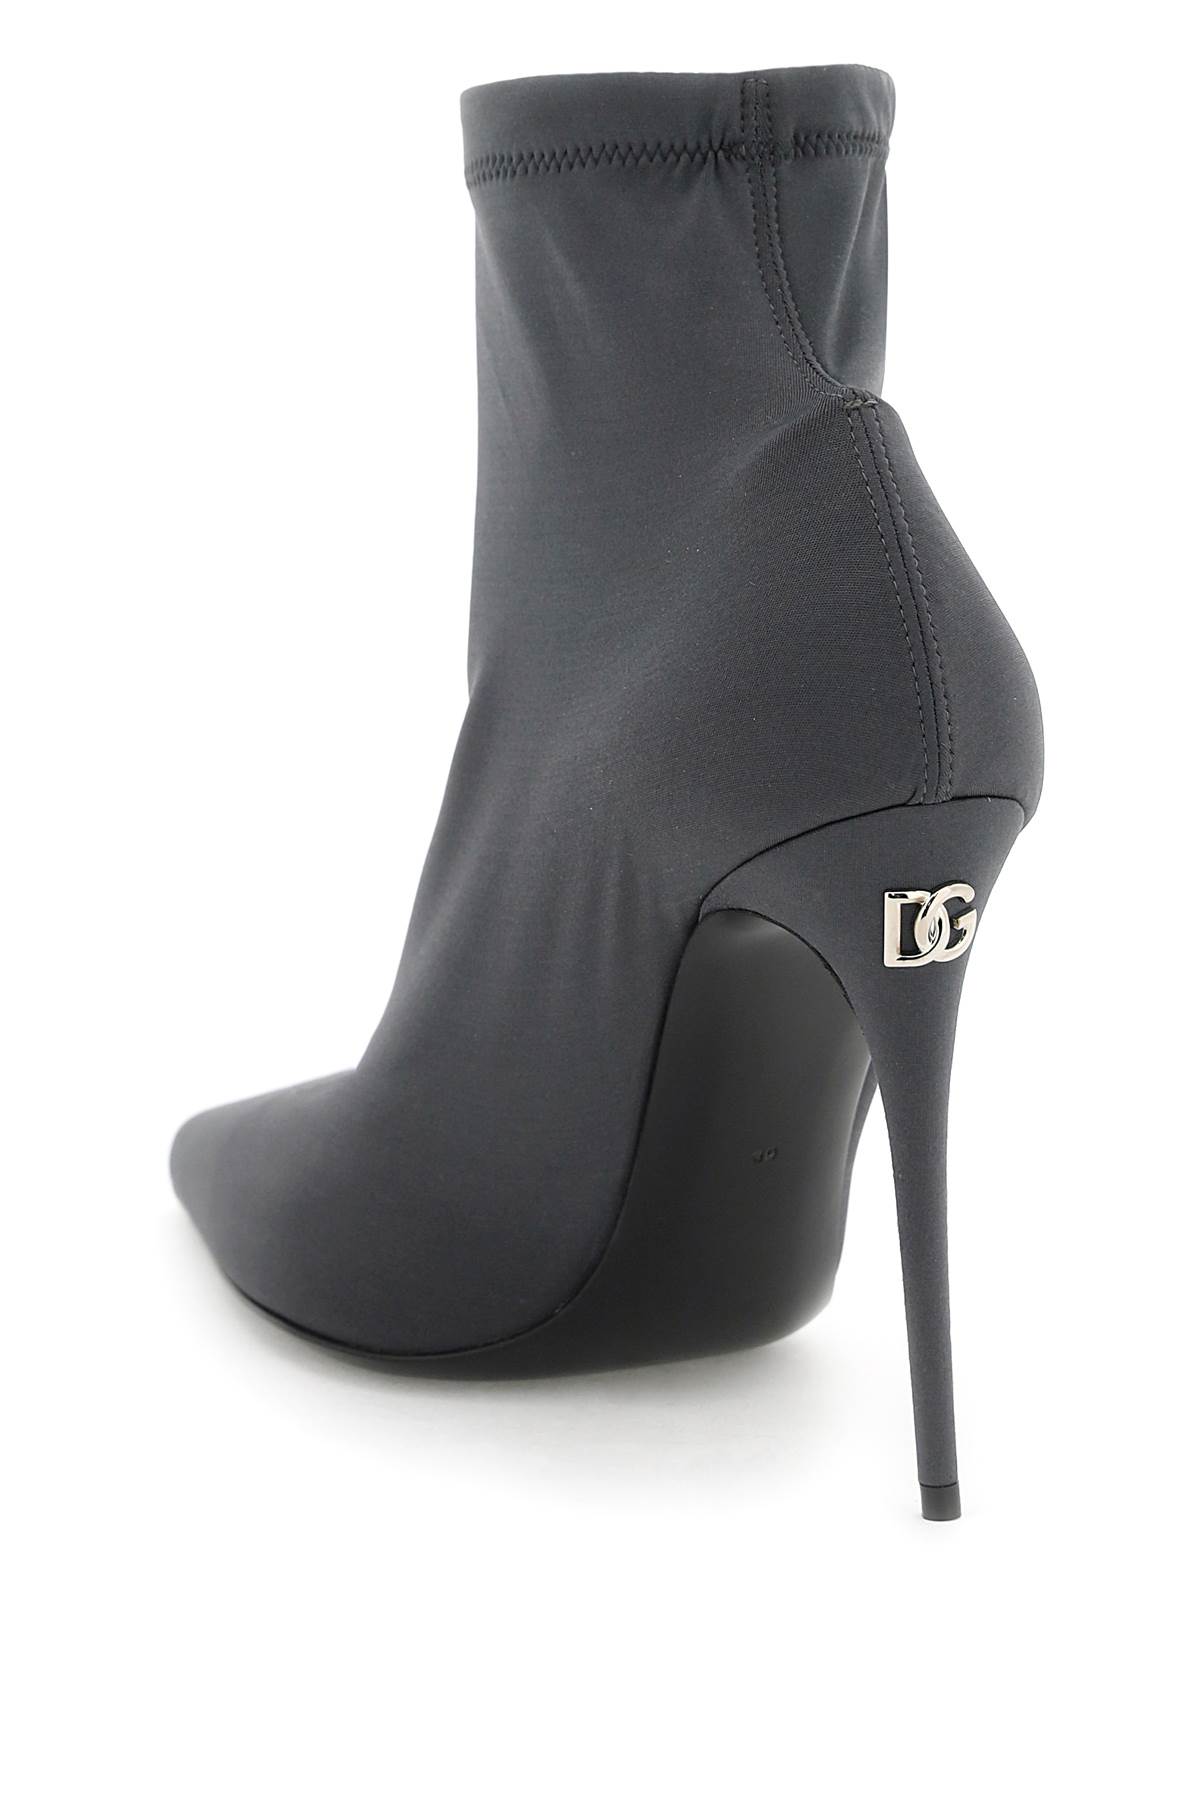 Shop Dolce & Gabbana Stretch Jersey Ankle Boots In Grigio Scuro (grey)